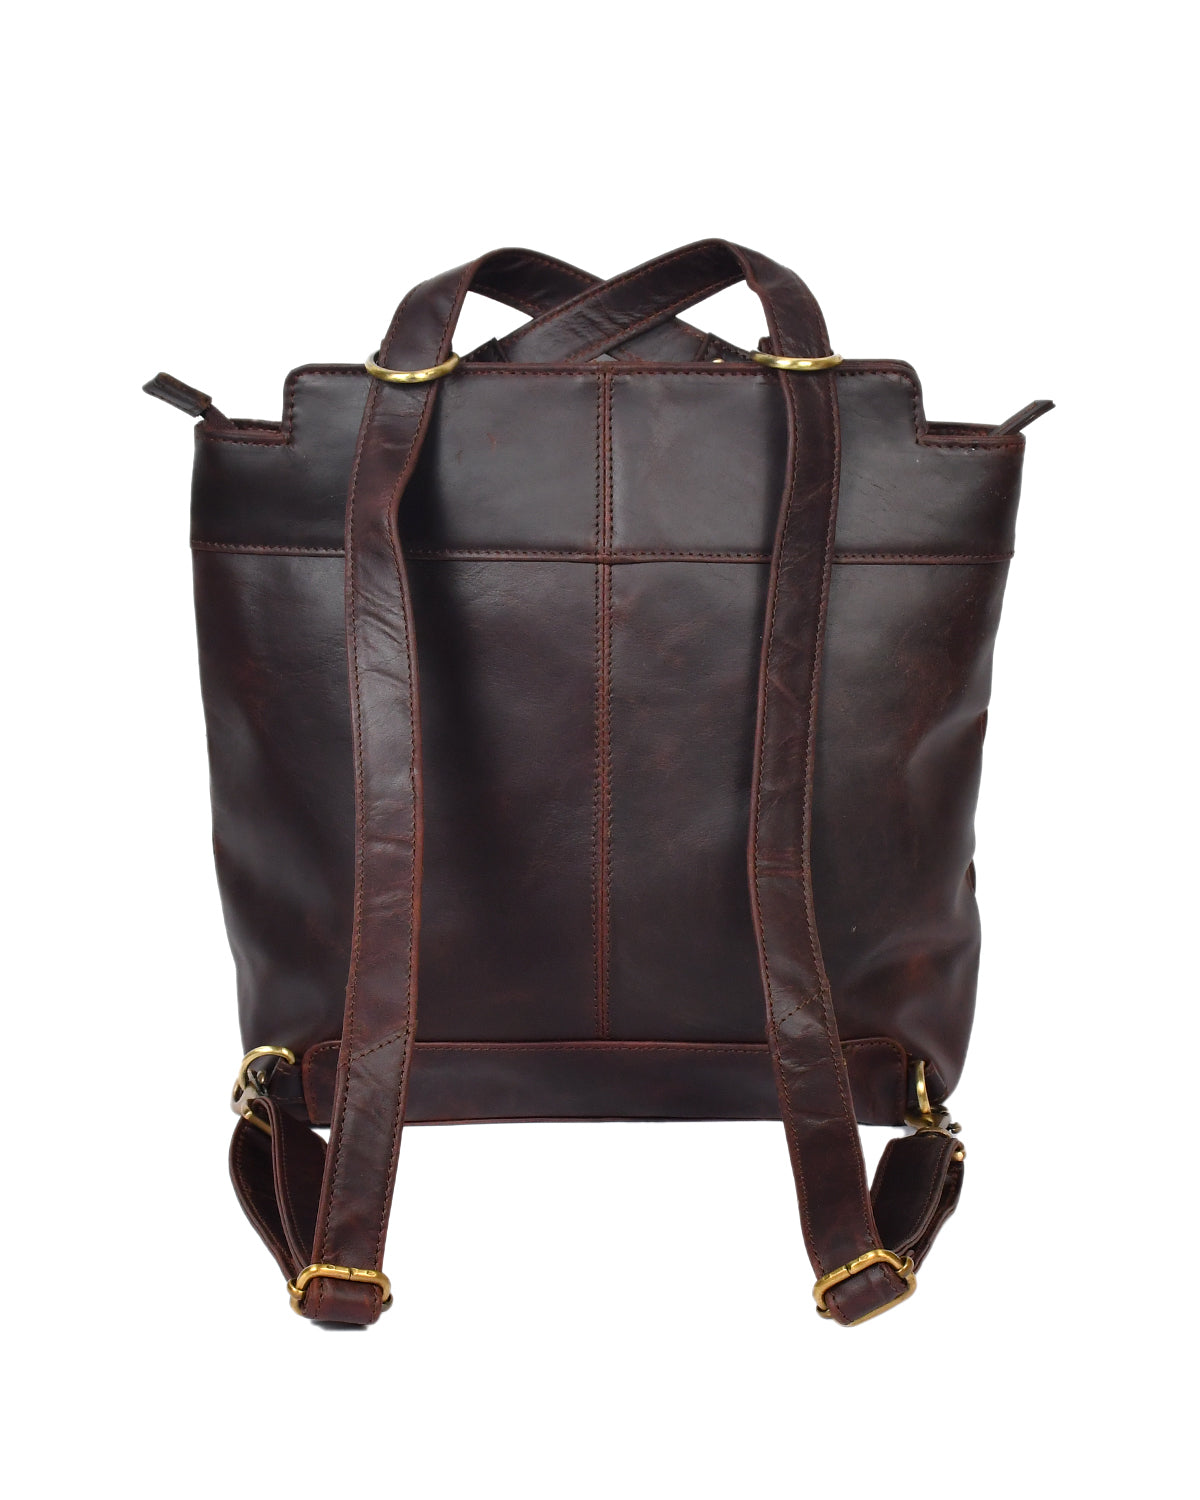 Experience Unmatched Style and Versatility with our Elevate Leather Backpack. - CELTICINDIA